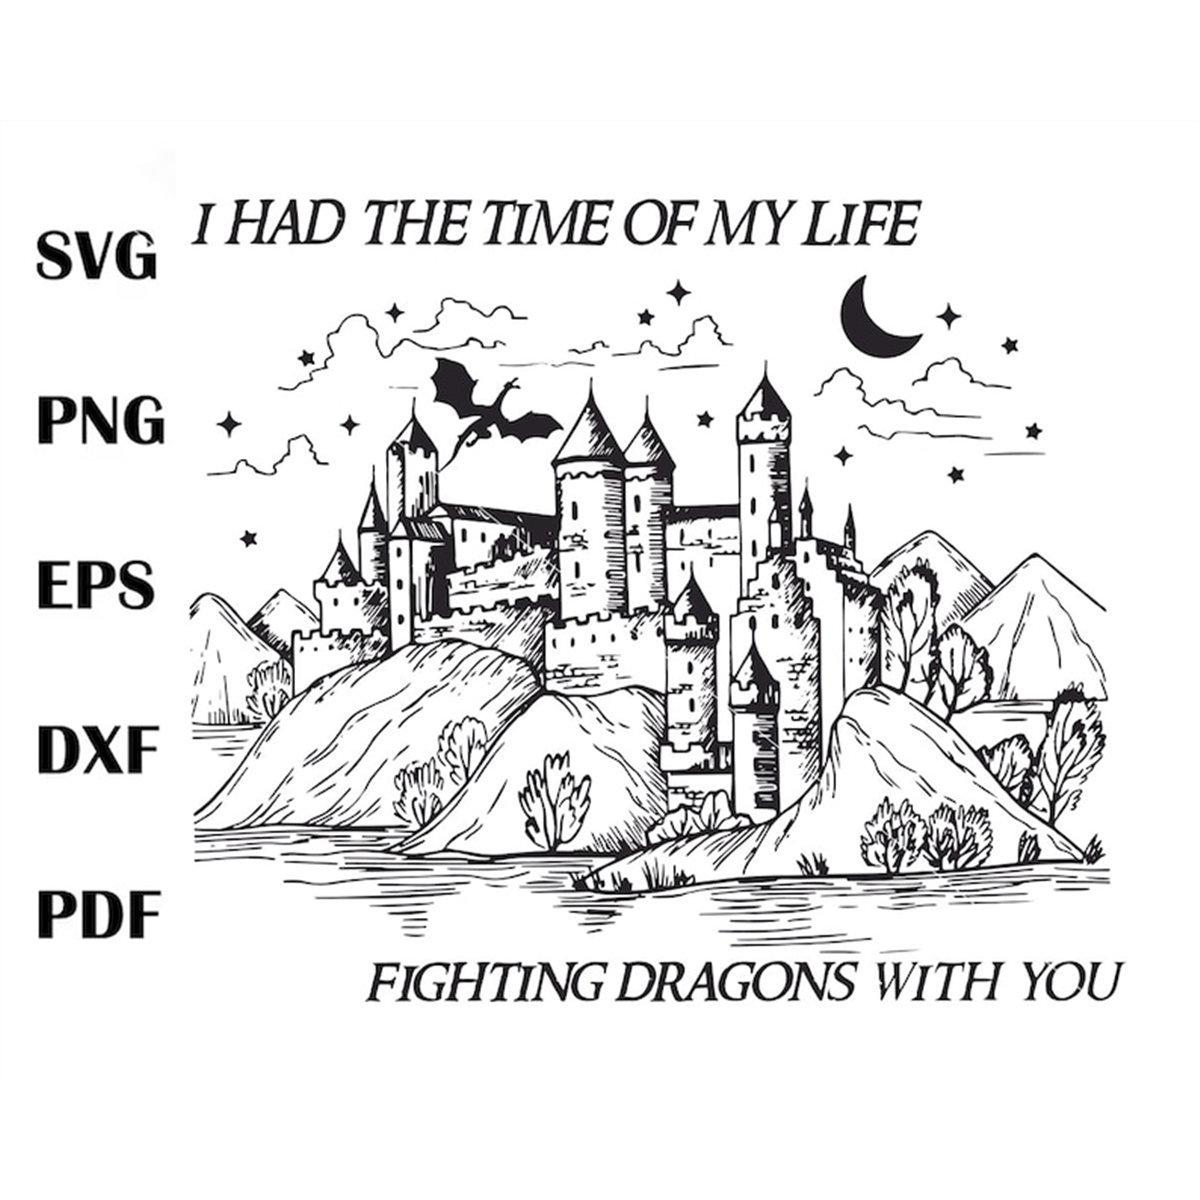 i-had-the-time-of-my-life-fighting-dragons-with-you-svg-image-1